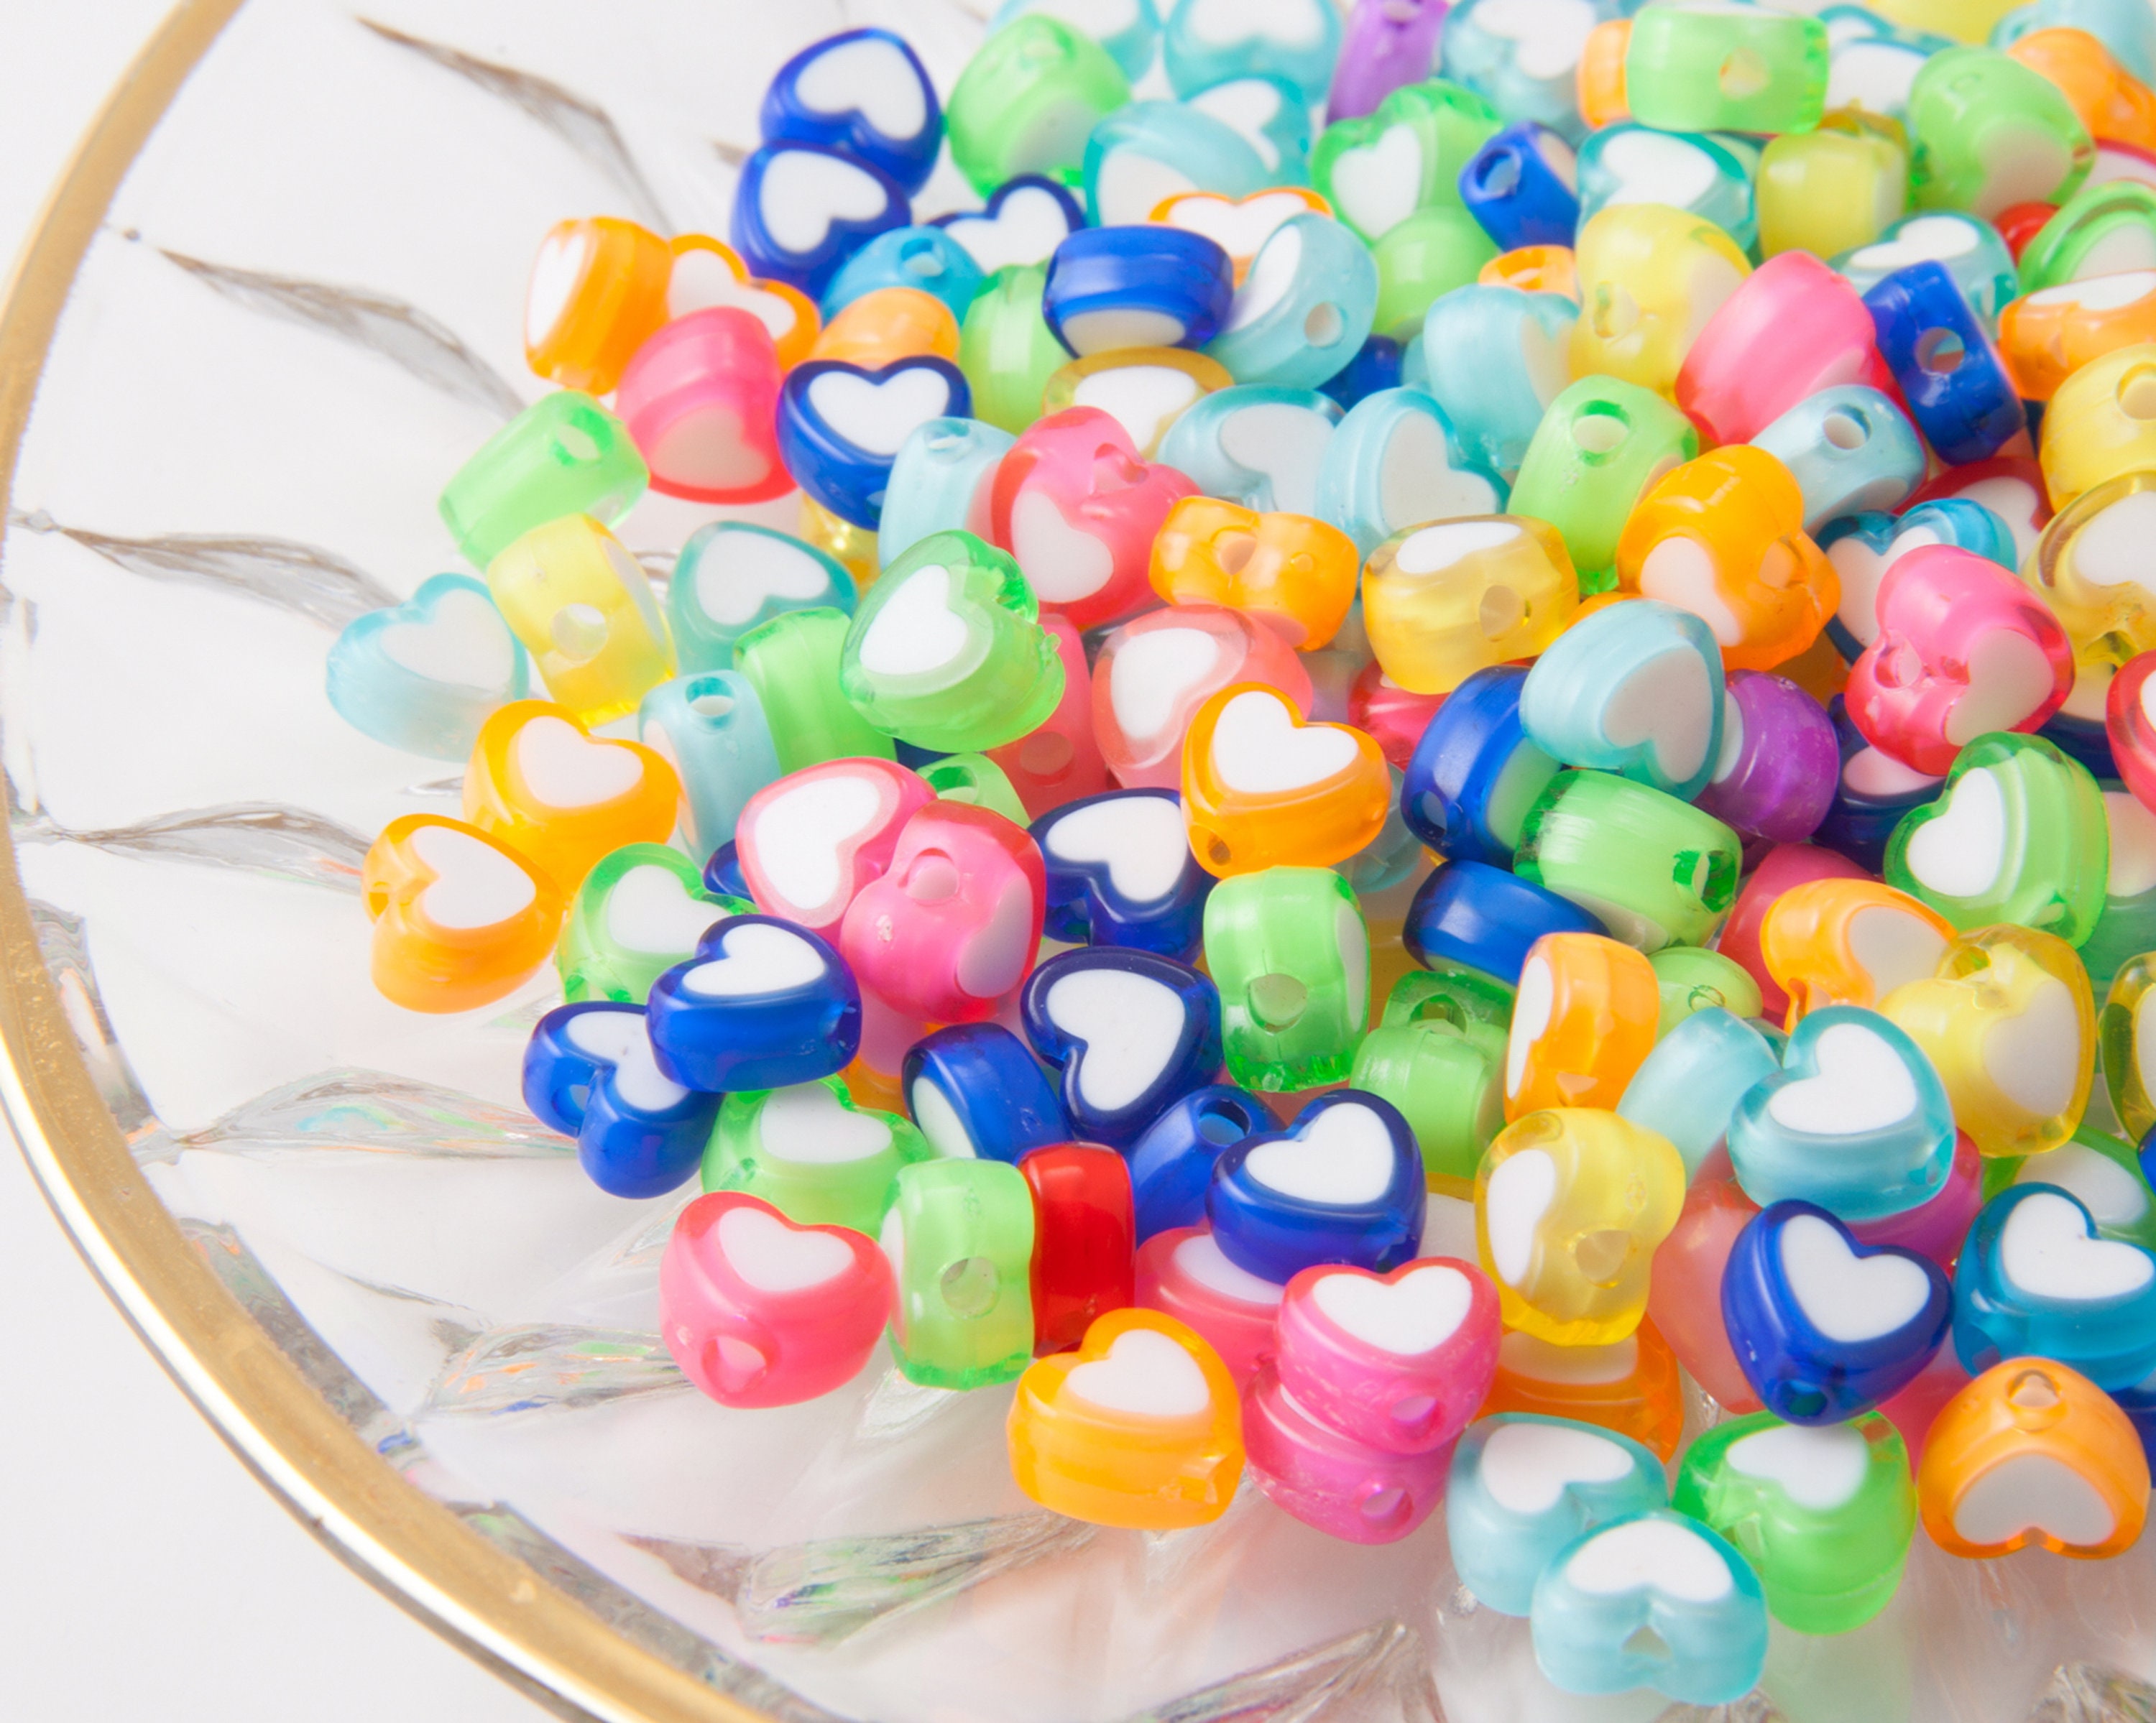 100pcs/pack 6-7mm Mixed Alphabet & Heart Shaped Acrylic Beads In